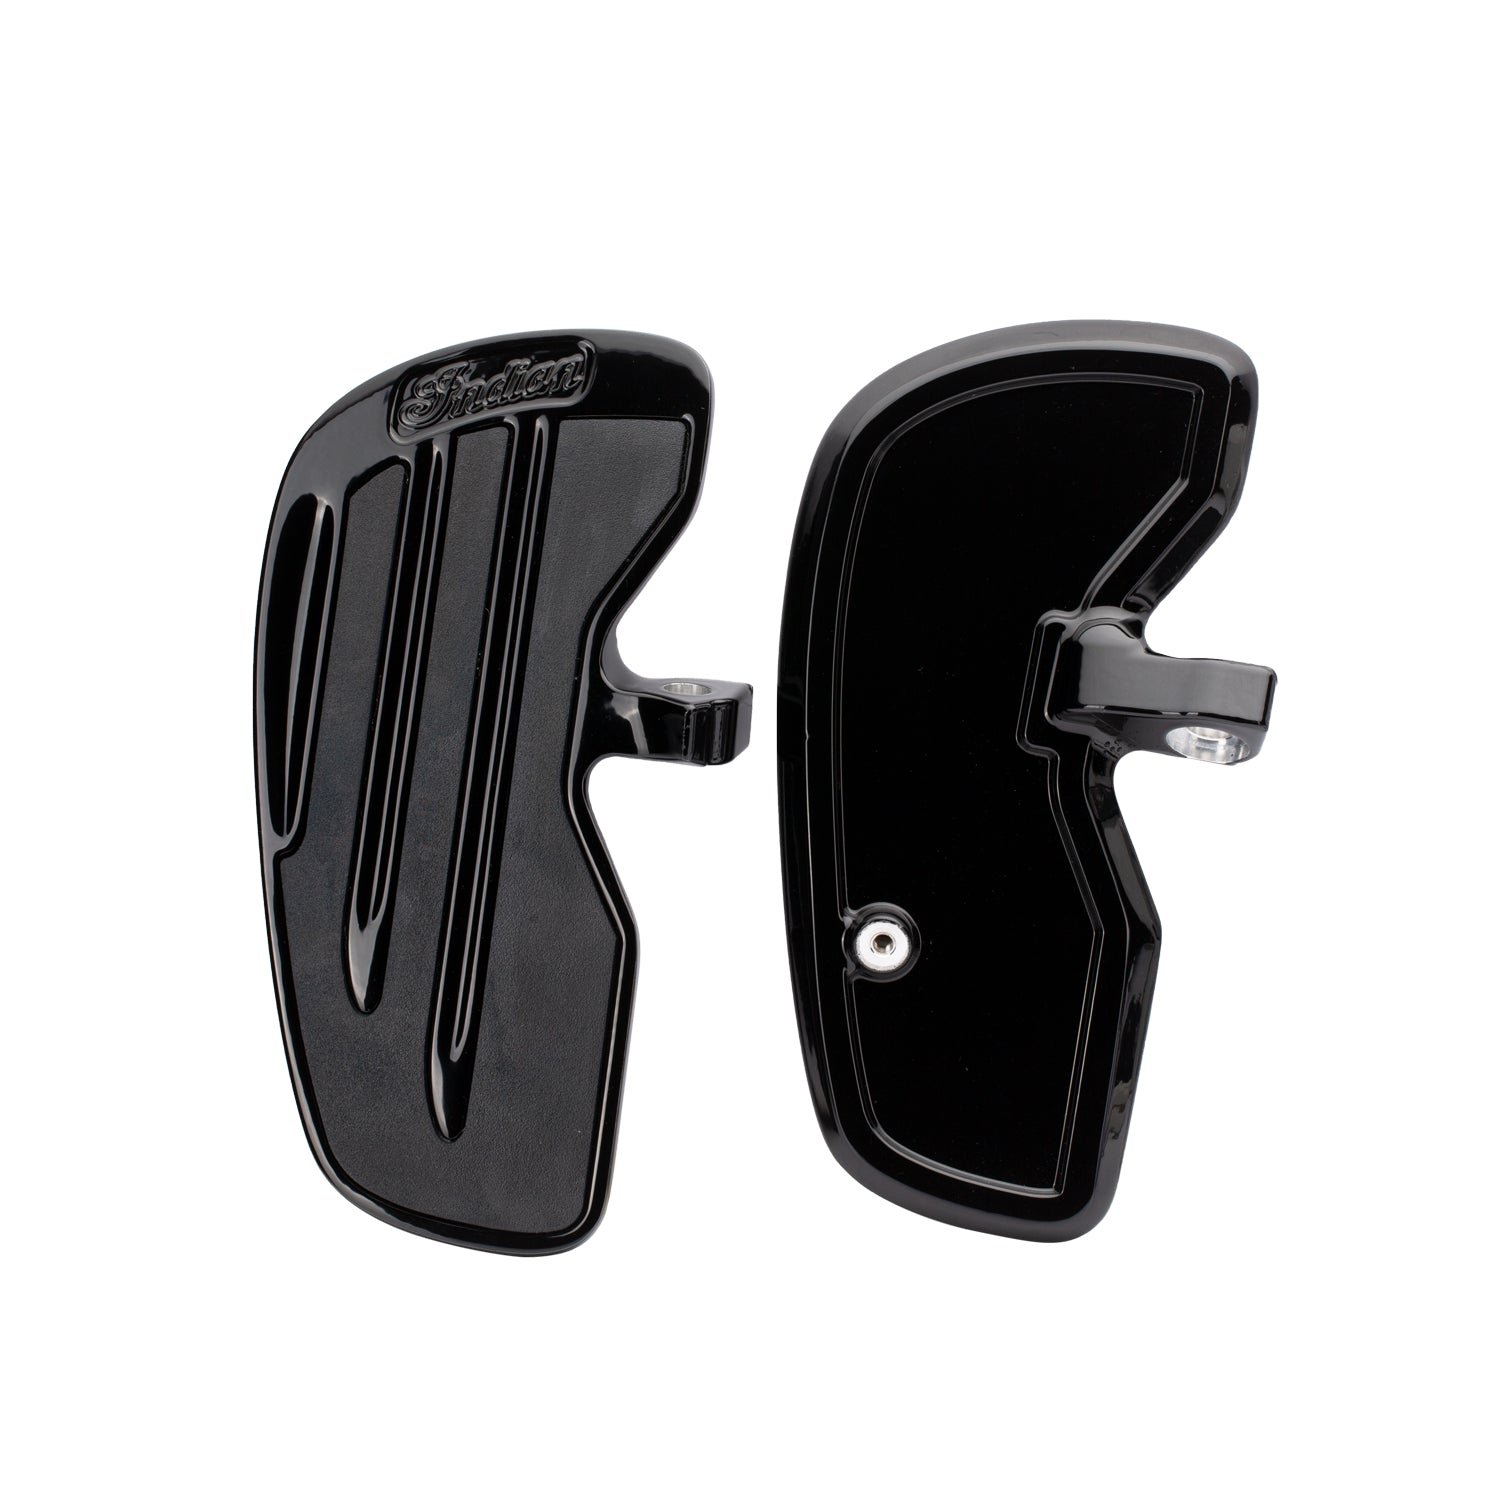 Rider Floorboards with Inlays in Gloss Black, Pair - 2883056-658